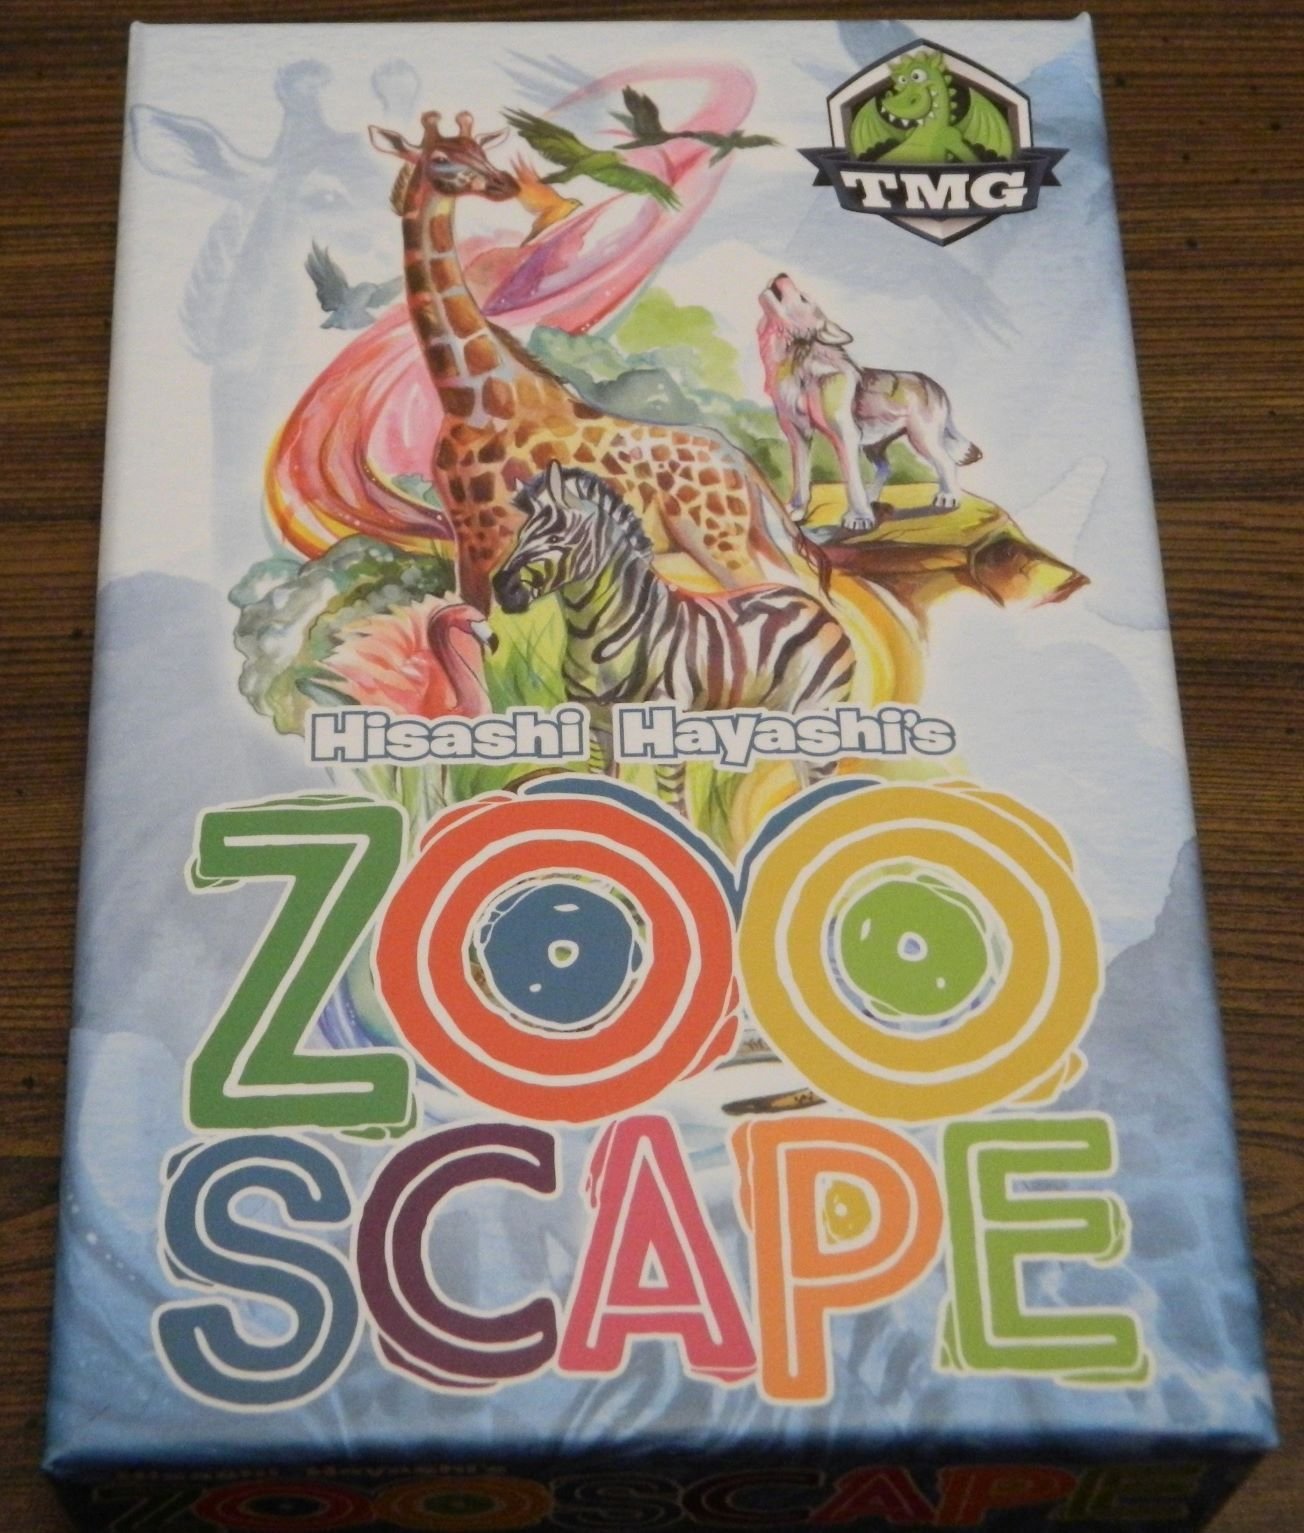 Zooscape Card Game Review and Rules